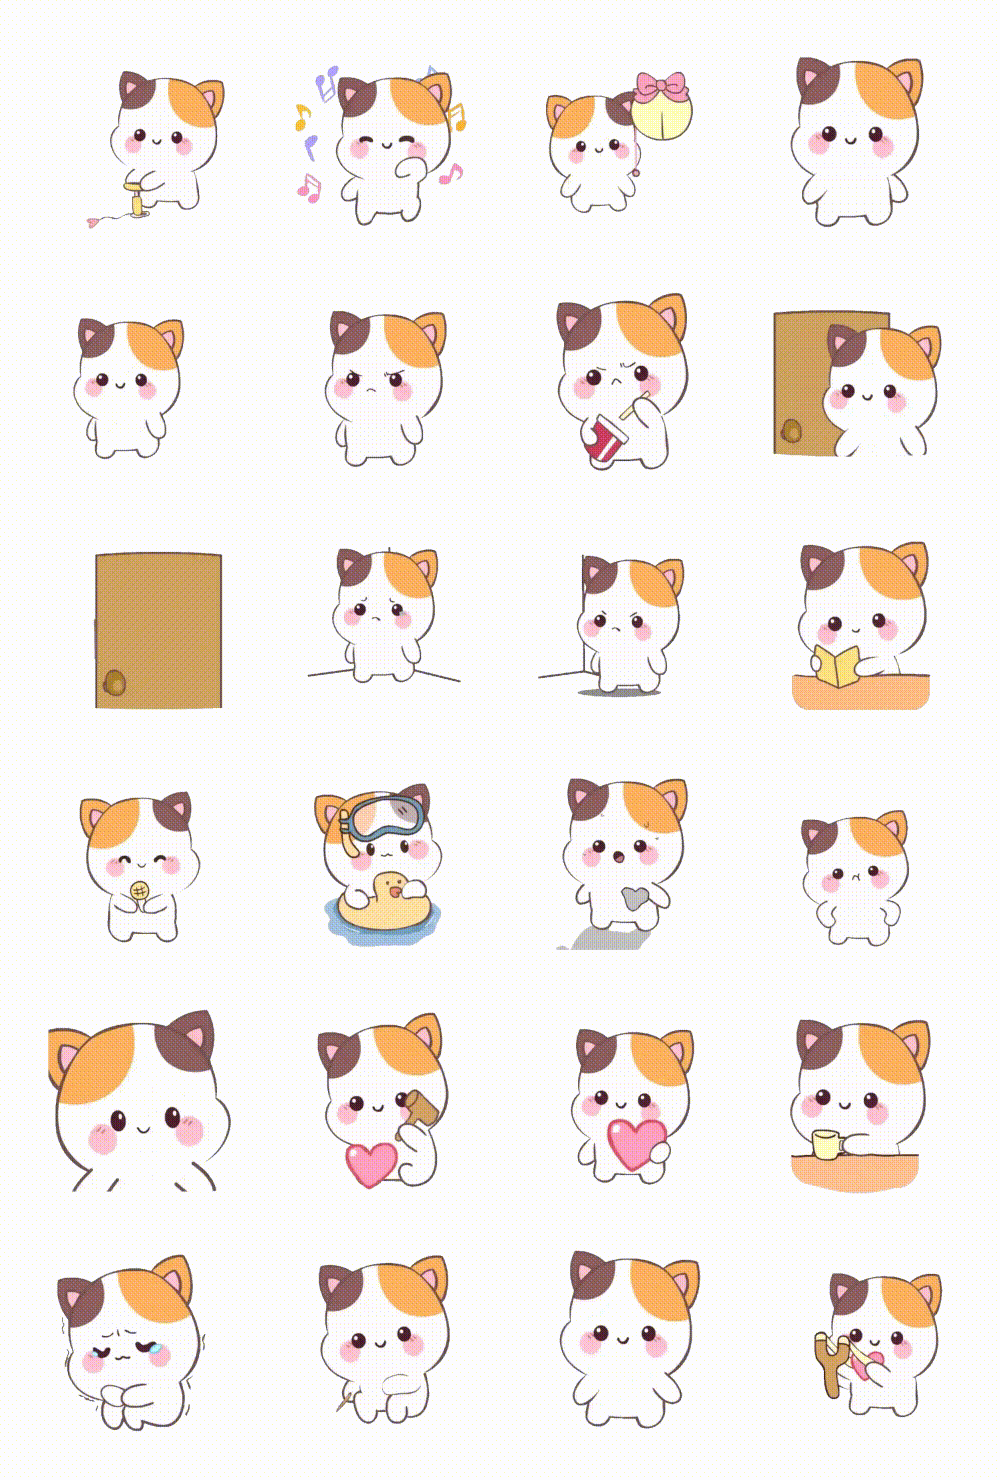 Calico Cat Animals,Animation/Cartoon,Food/Drink sticker pack for Whatsapp, Telegram, Signal, and others chatting and message apps